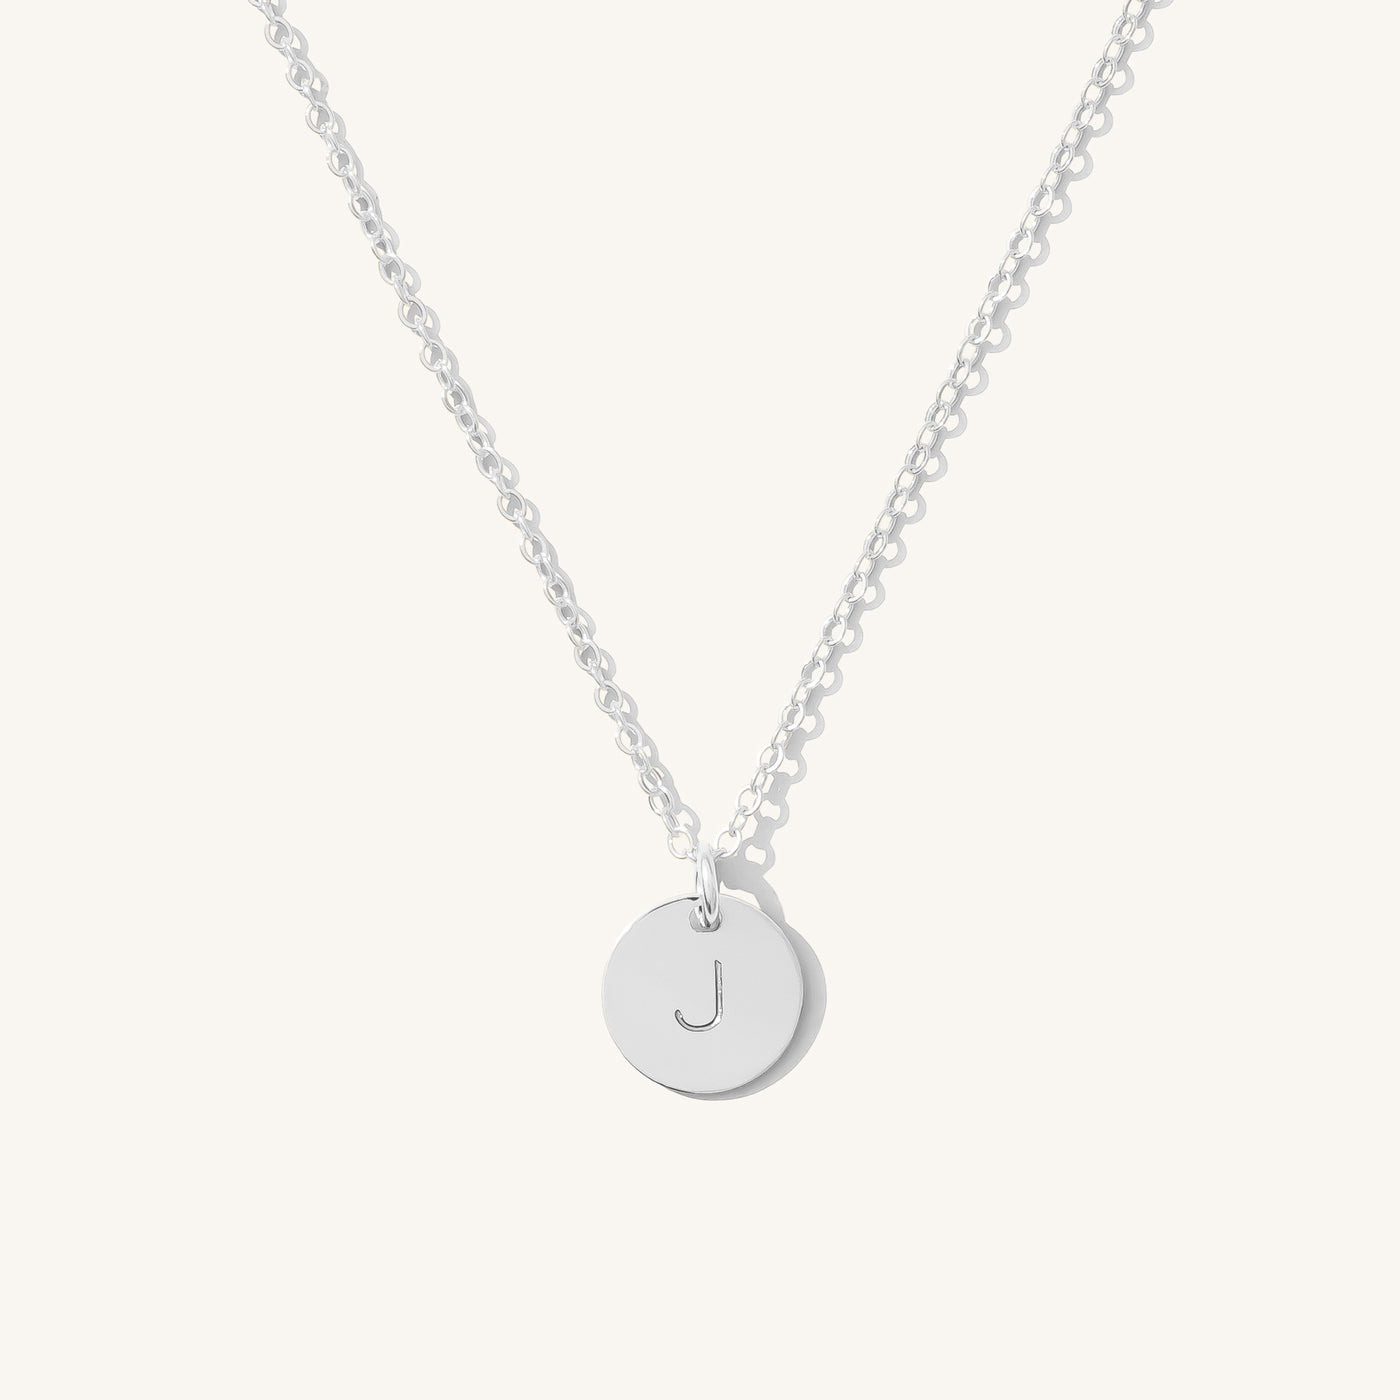 J Dainty Initial Necklace